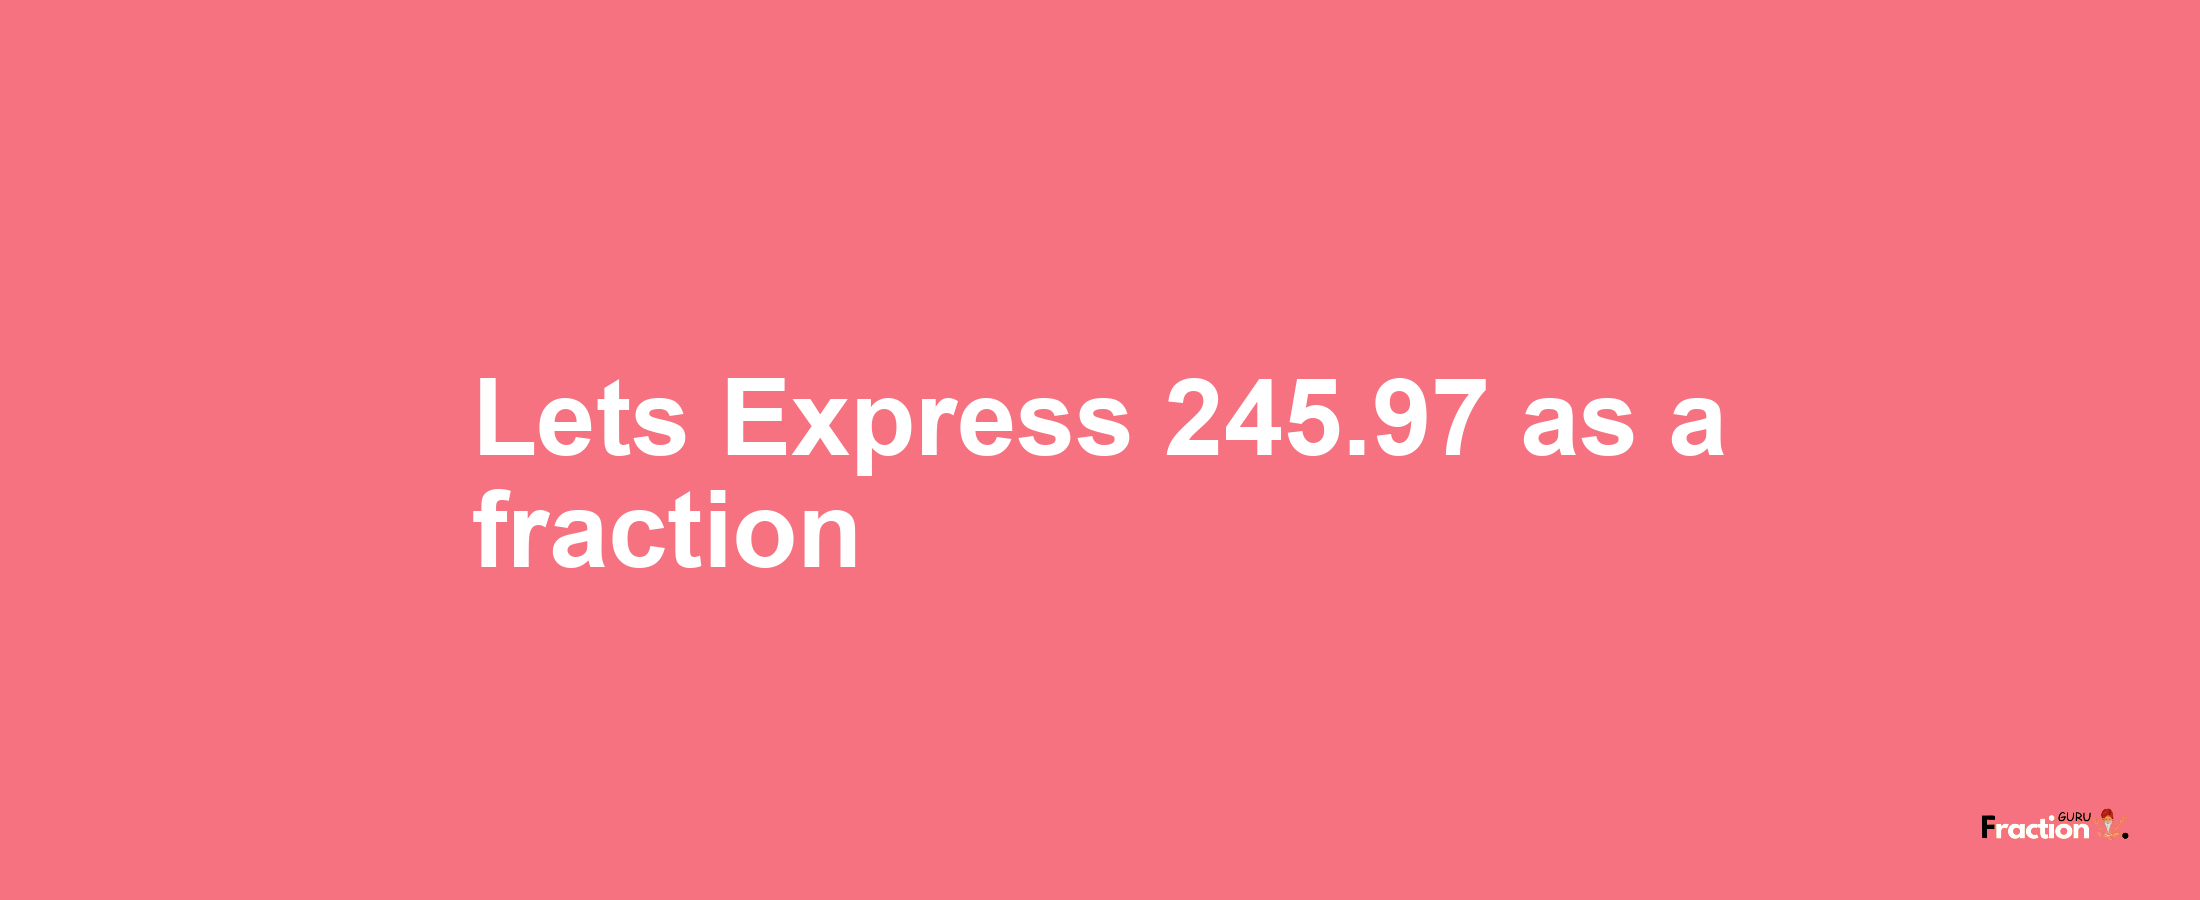 Lets Express 245.97 as afraction